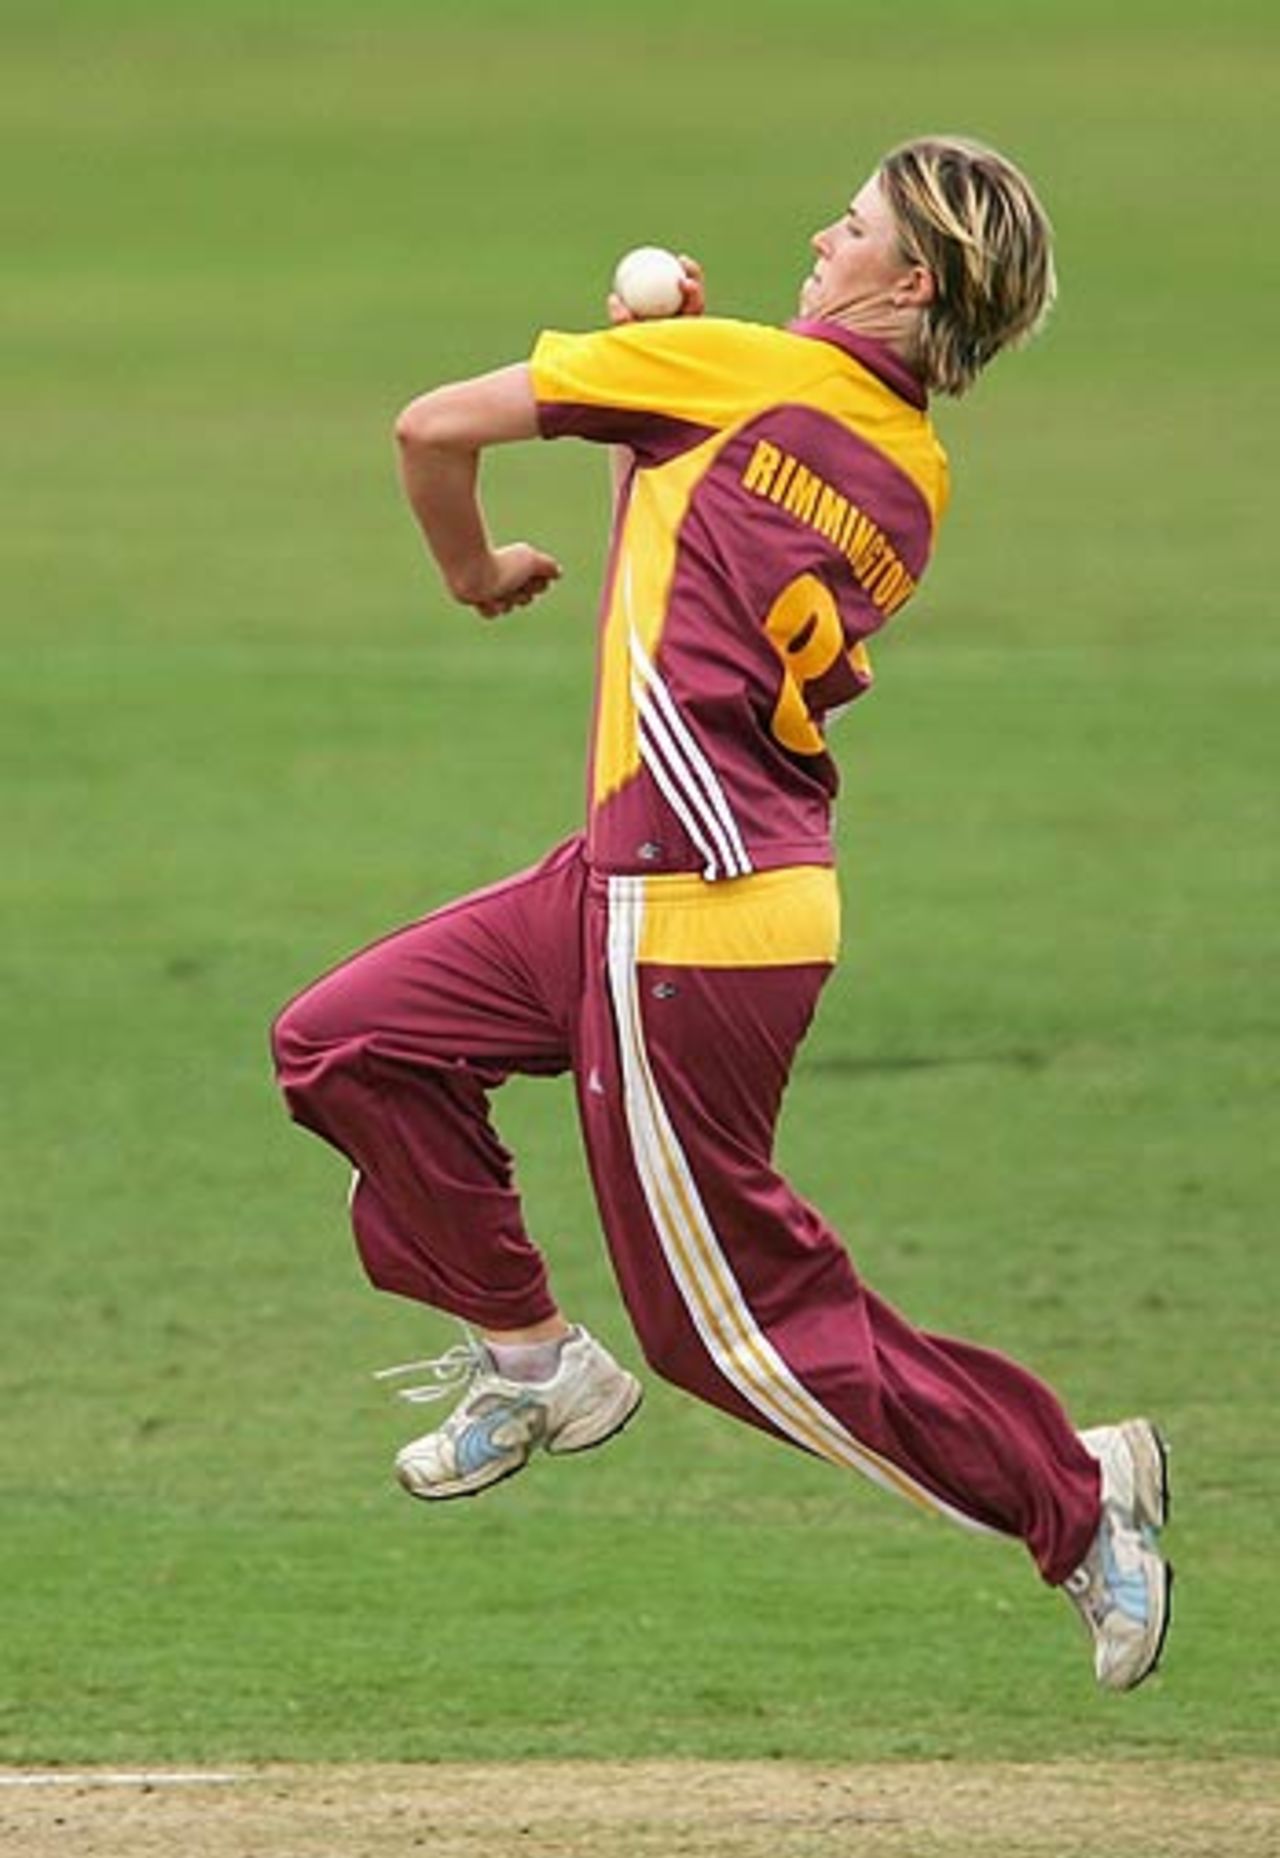 Rikki-Lee Rimmington bowls against New South Wales, New South Wales Women v Queensland Women, 2nd Final, Women's National Cricket League, Sydney, February 4, 2006